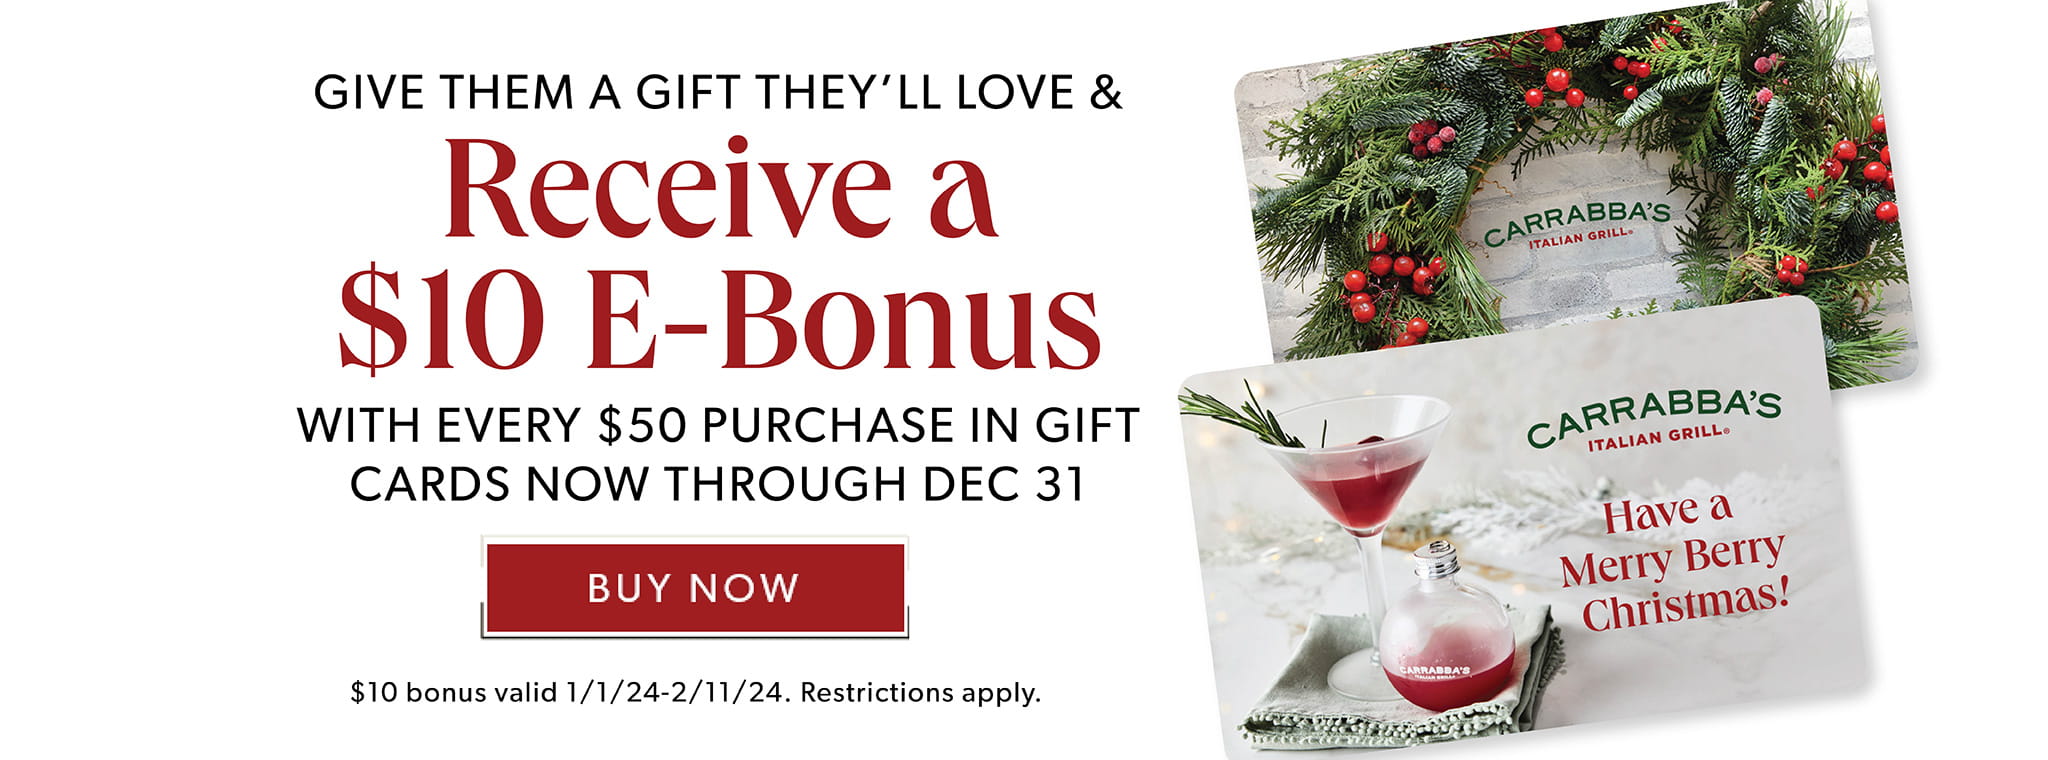 Give Them A Gift They'll Love & Receive A $10 E-Bonus With Every $50 Purchase In Gift Cards Now Through Dec. 31 - Buy Now